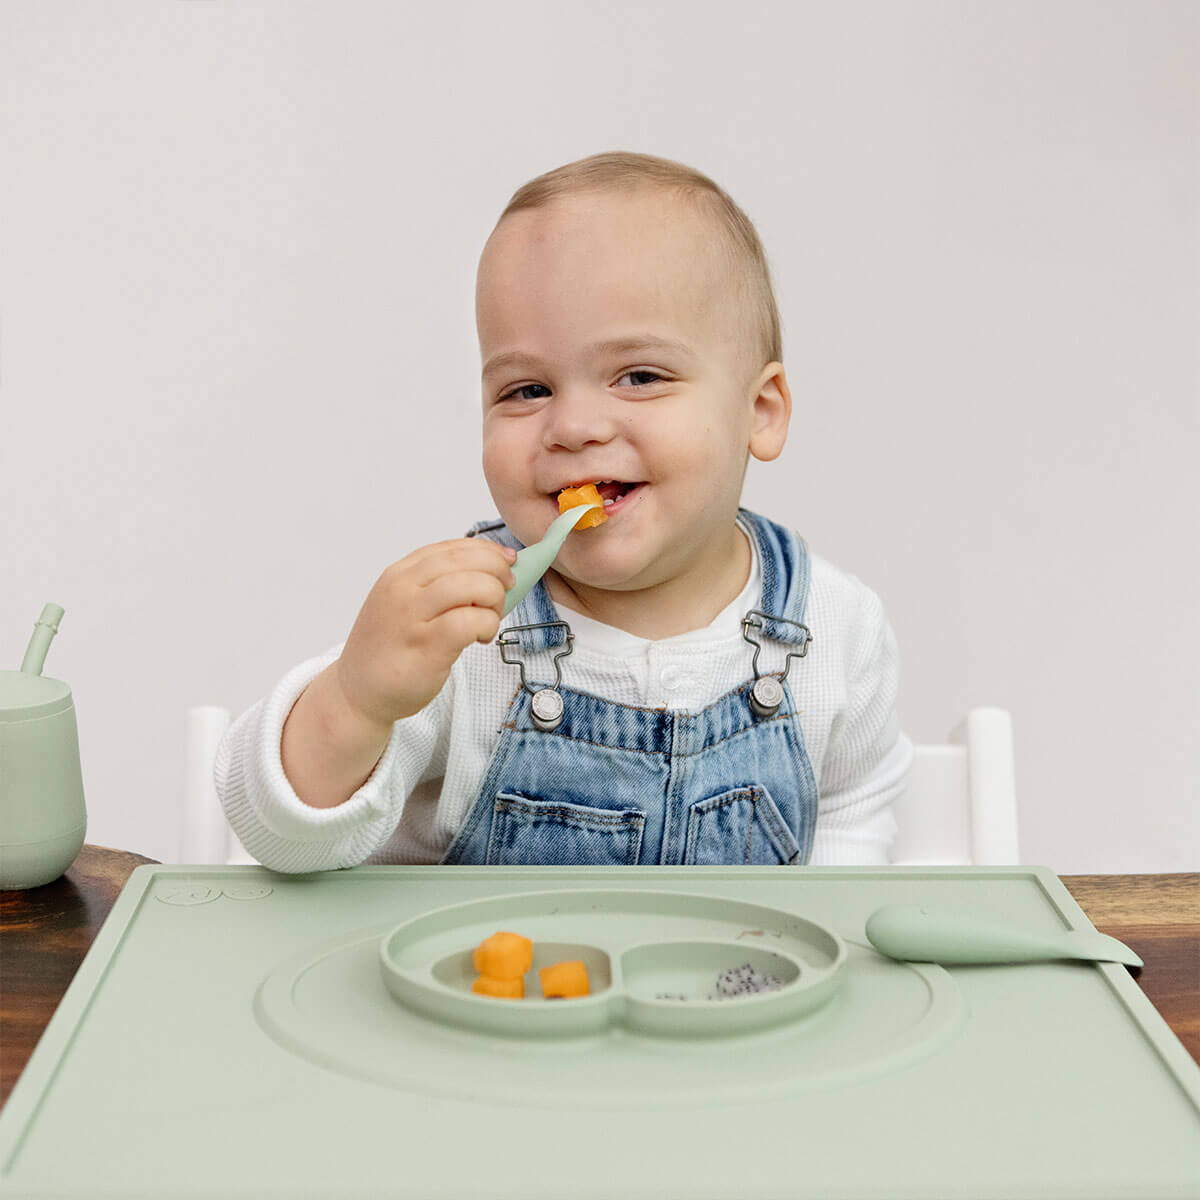 ezpz Mini Placemat in Sage Green is a silicone placemat for toddlers that grips to the table